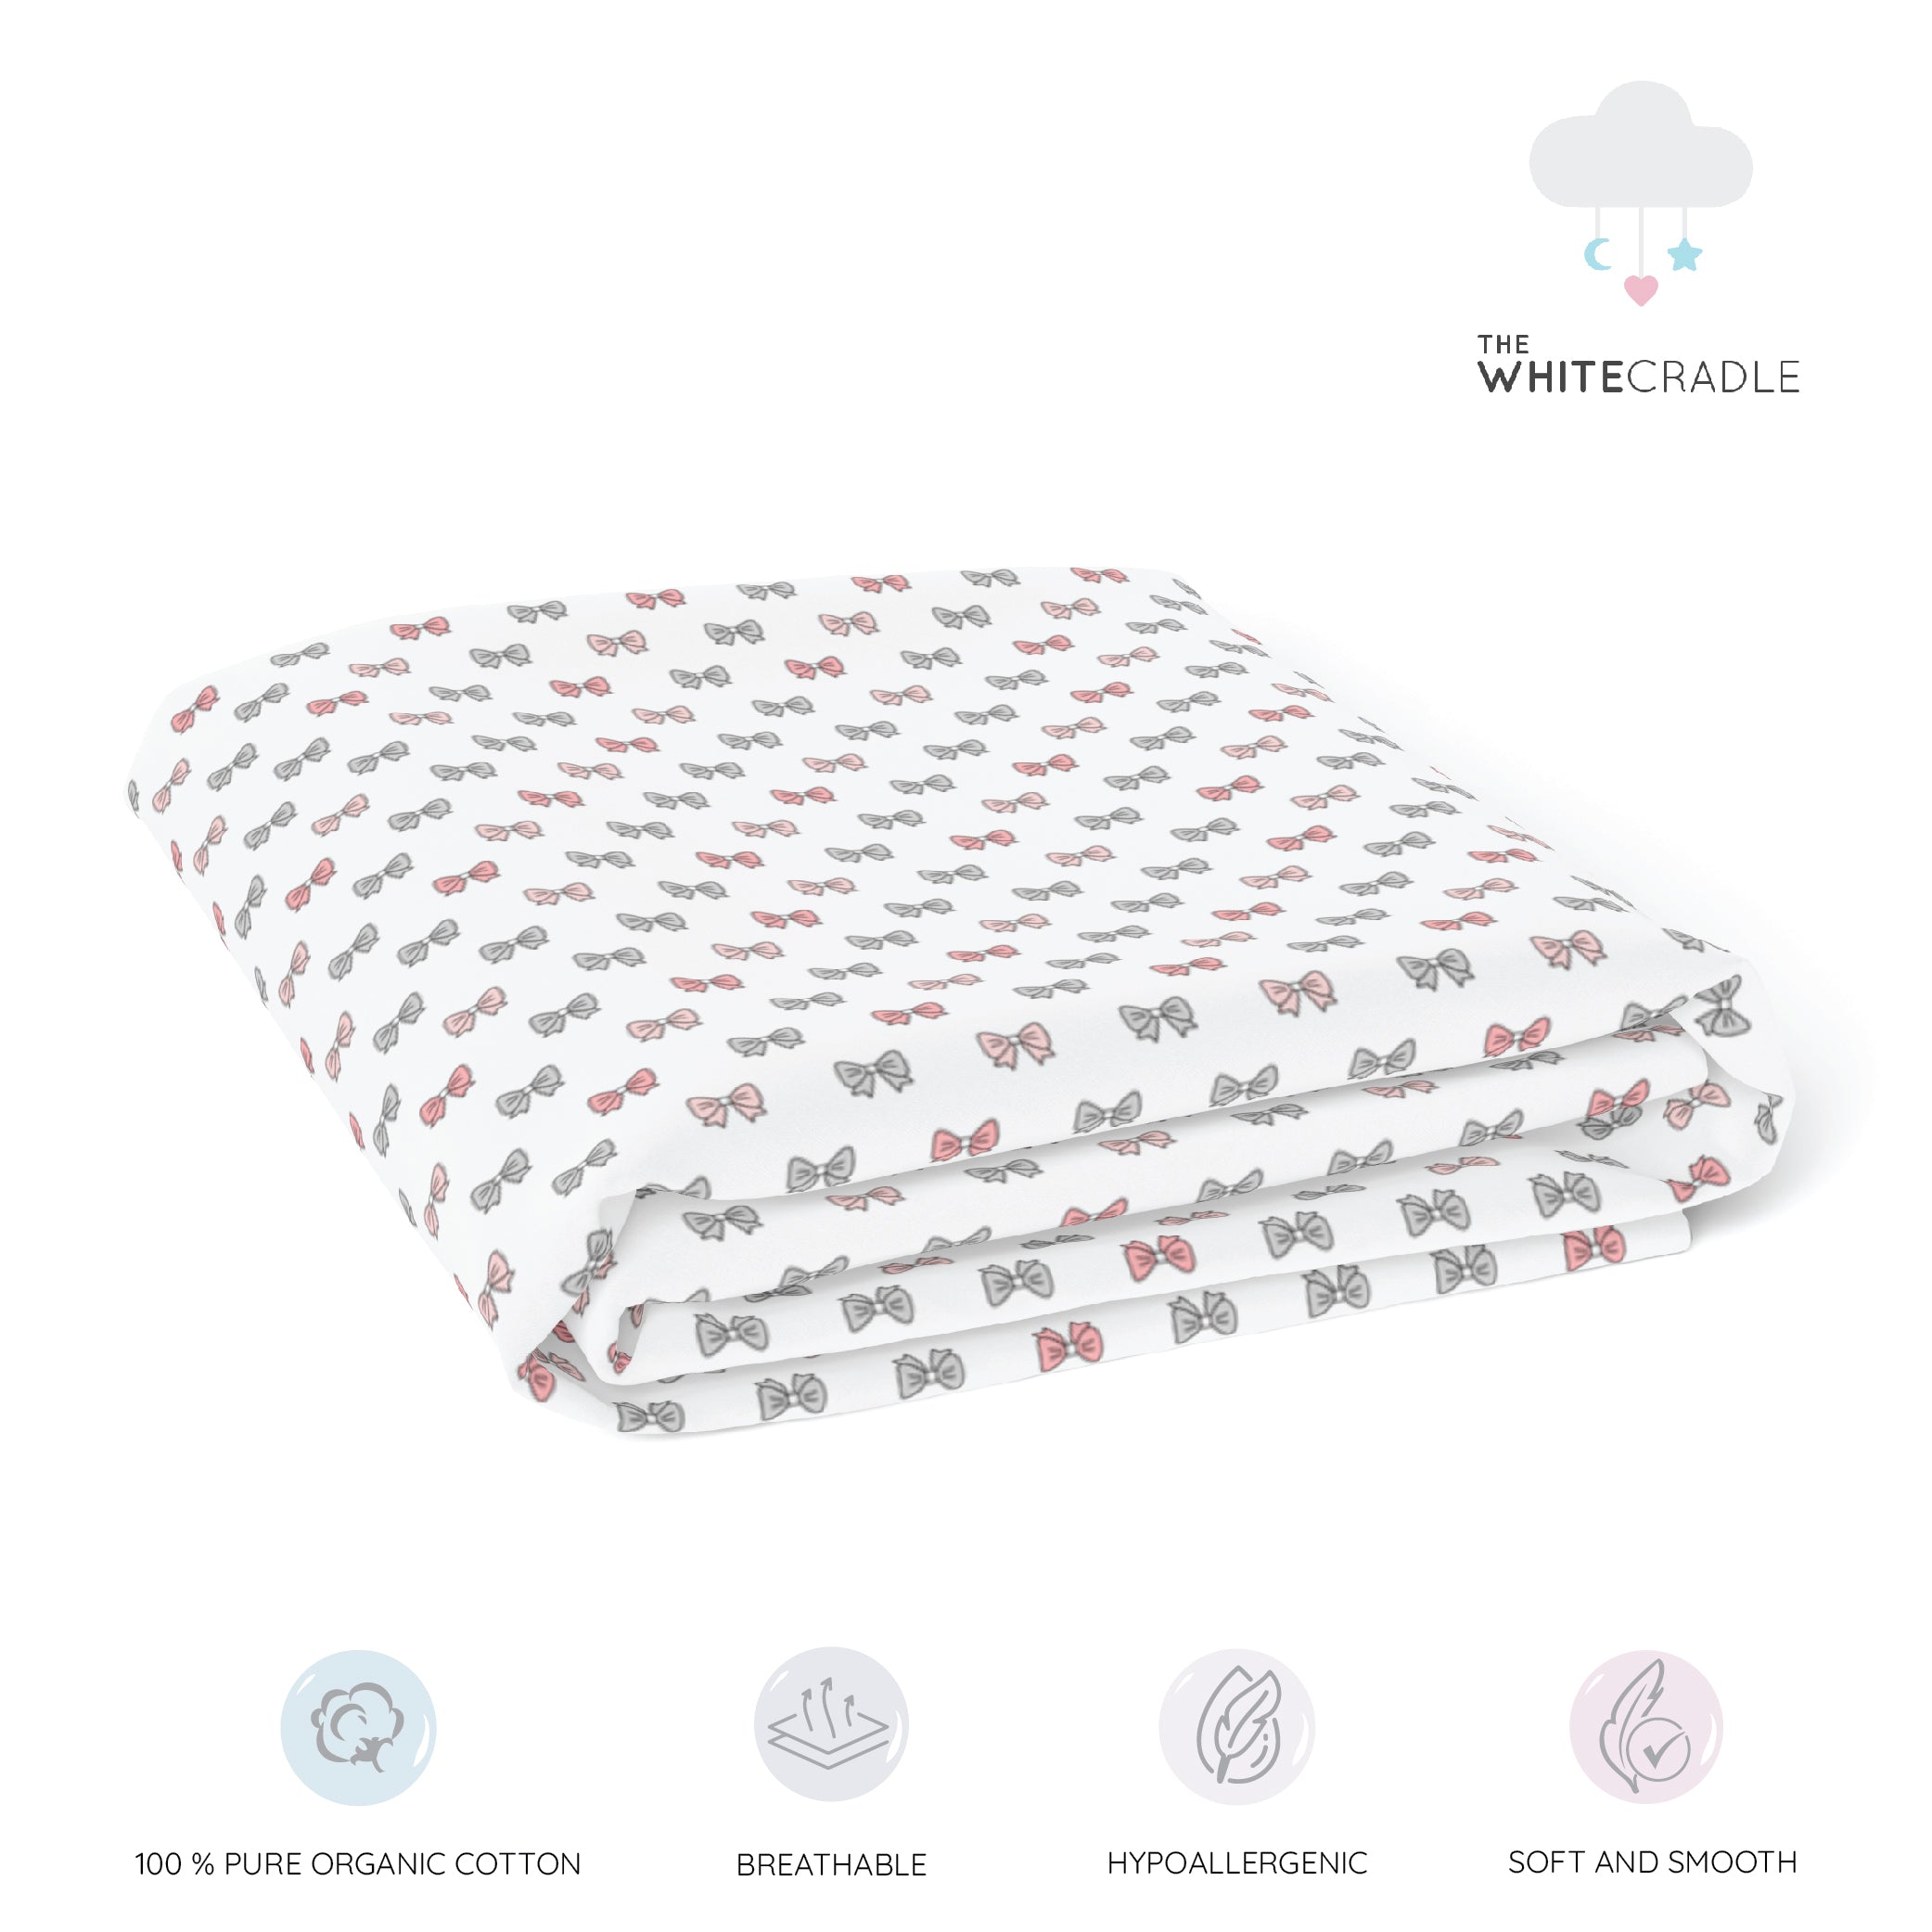 The White Cradle Pure Organic Cotton Fitted Cot Sheet for Baby Crib 24 x 48 inch - Pink Bows (Medium)